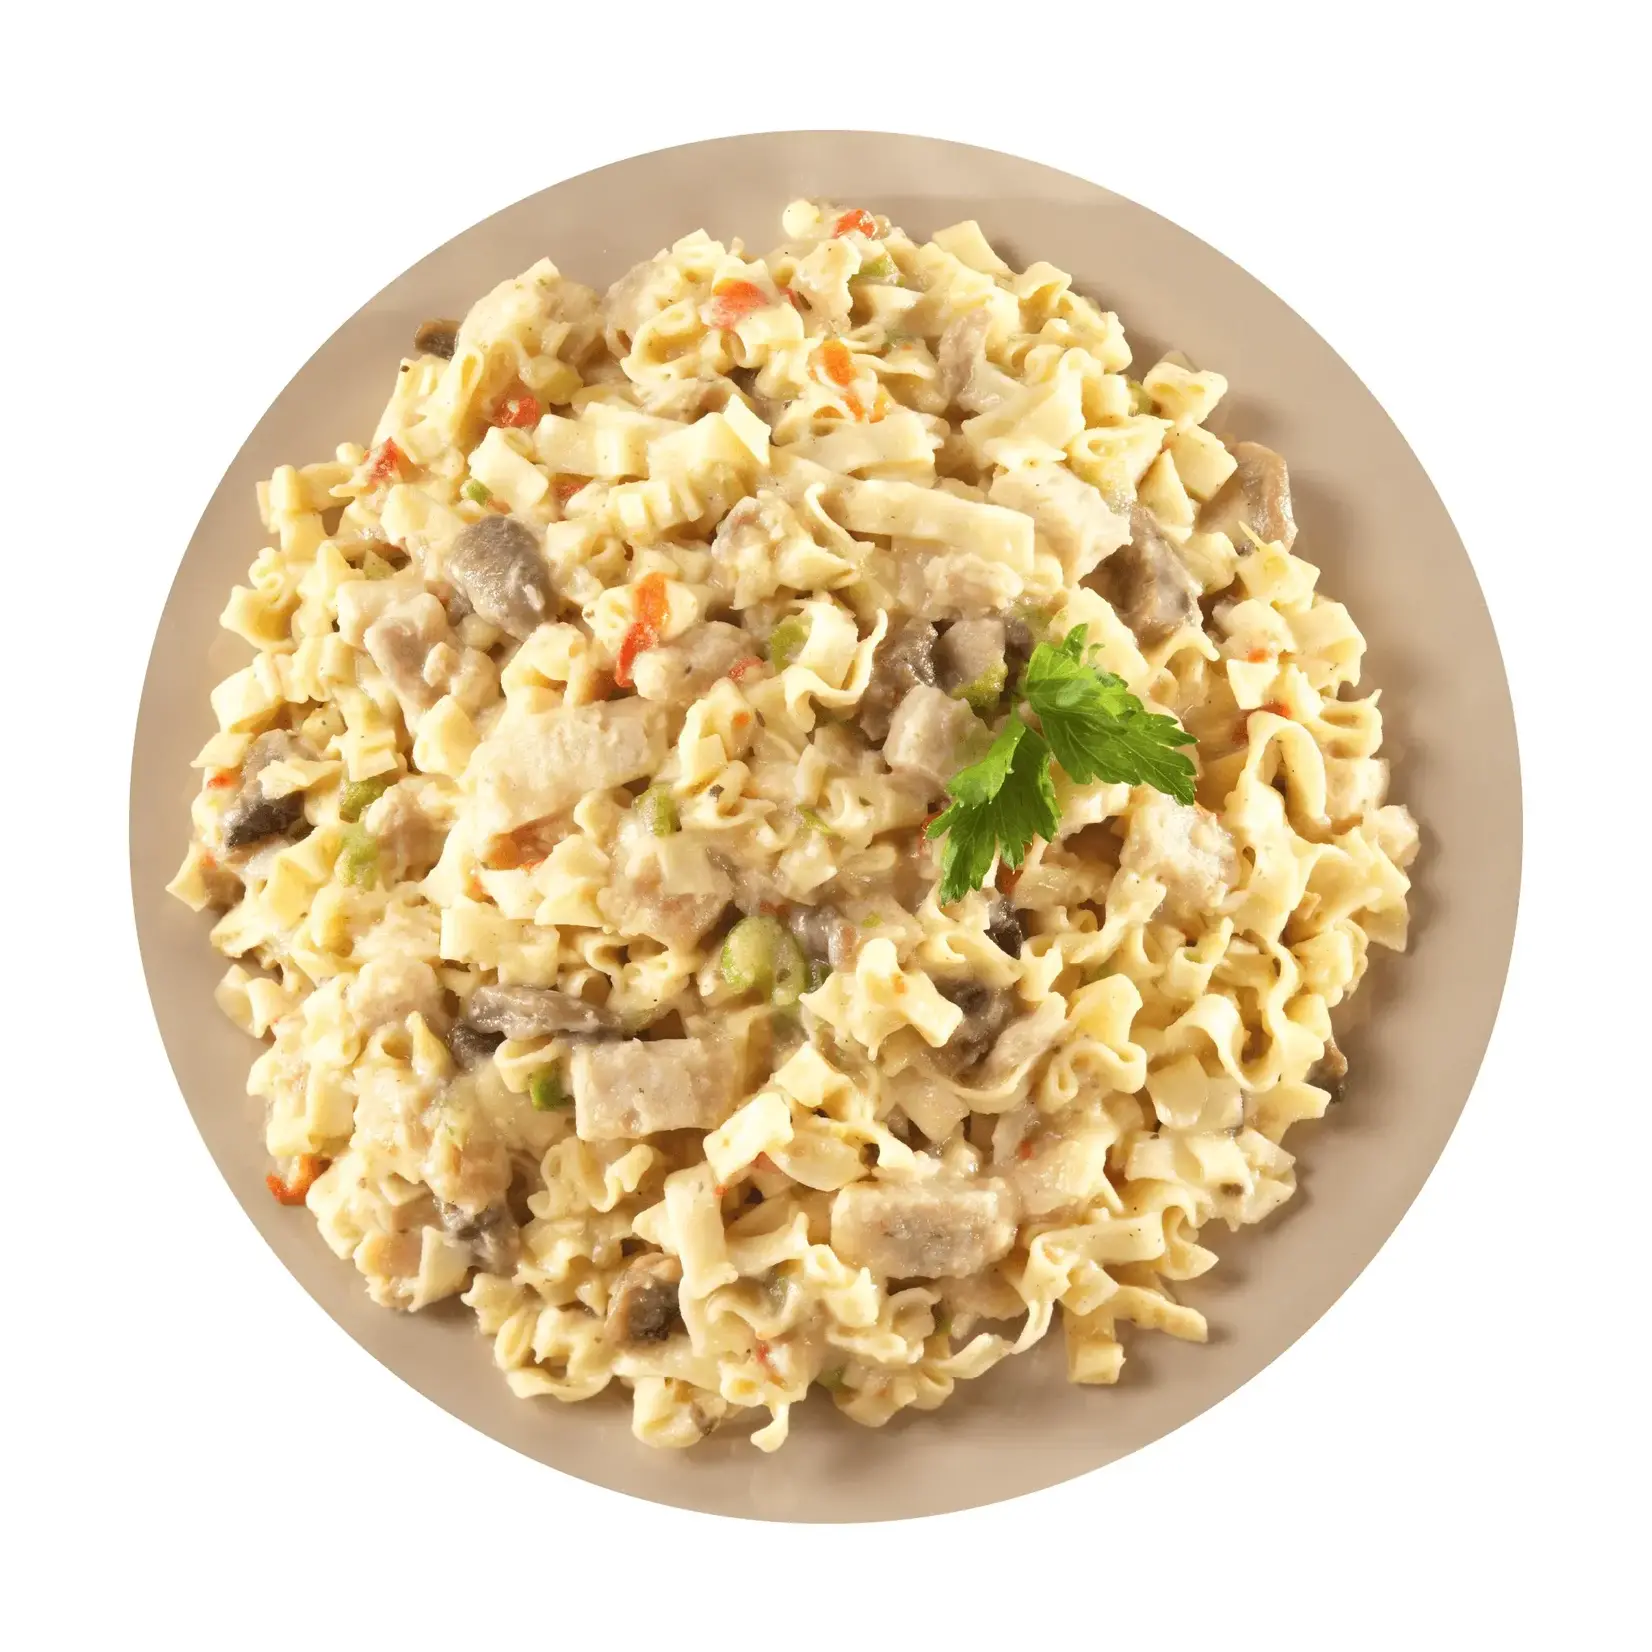 MOUNTAIN HOUSE Mountain House Homestyle Chicken Noodle Casserole  #10 Can 10 Servings